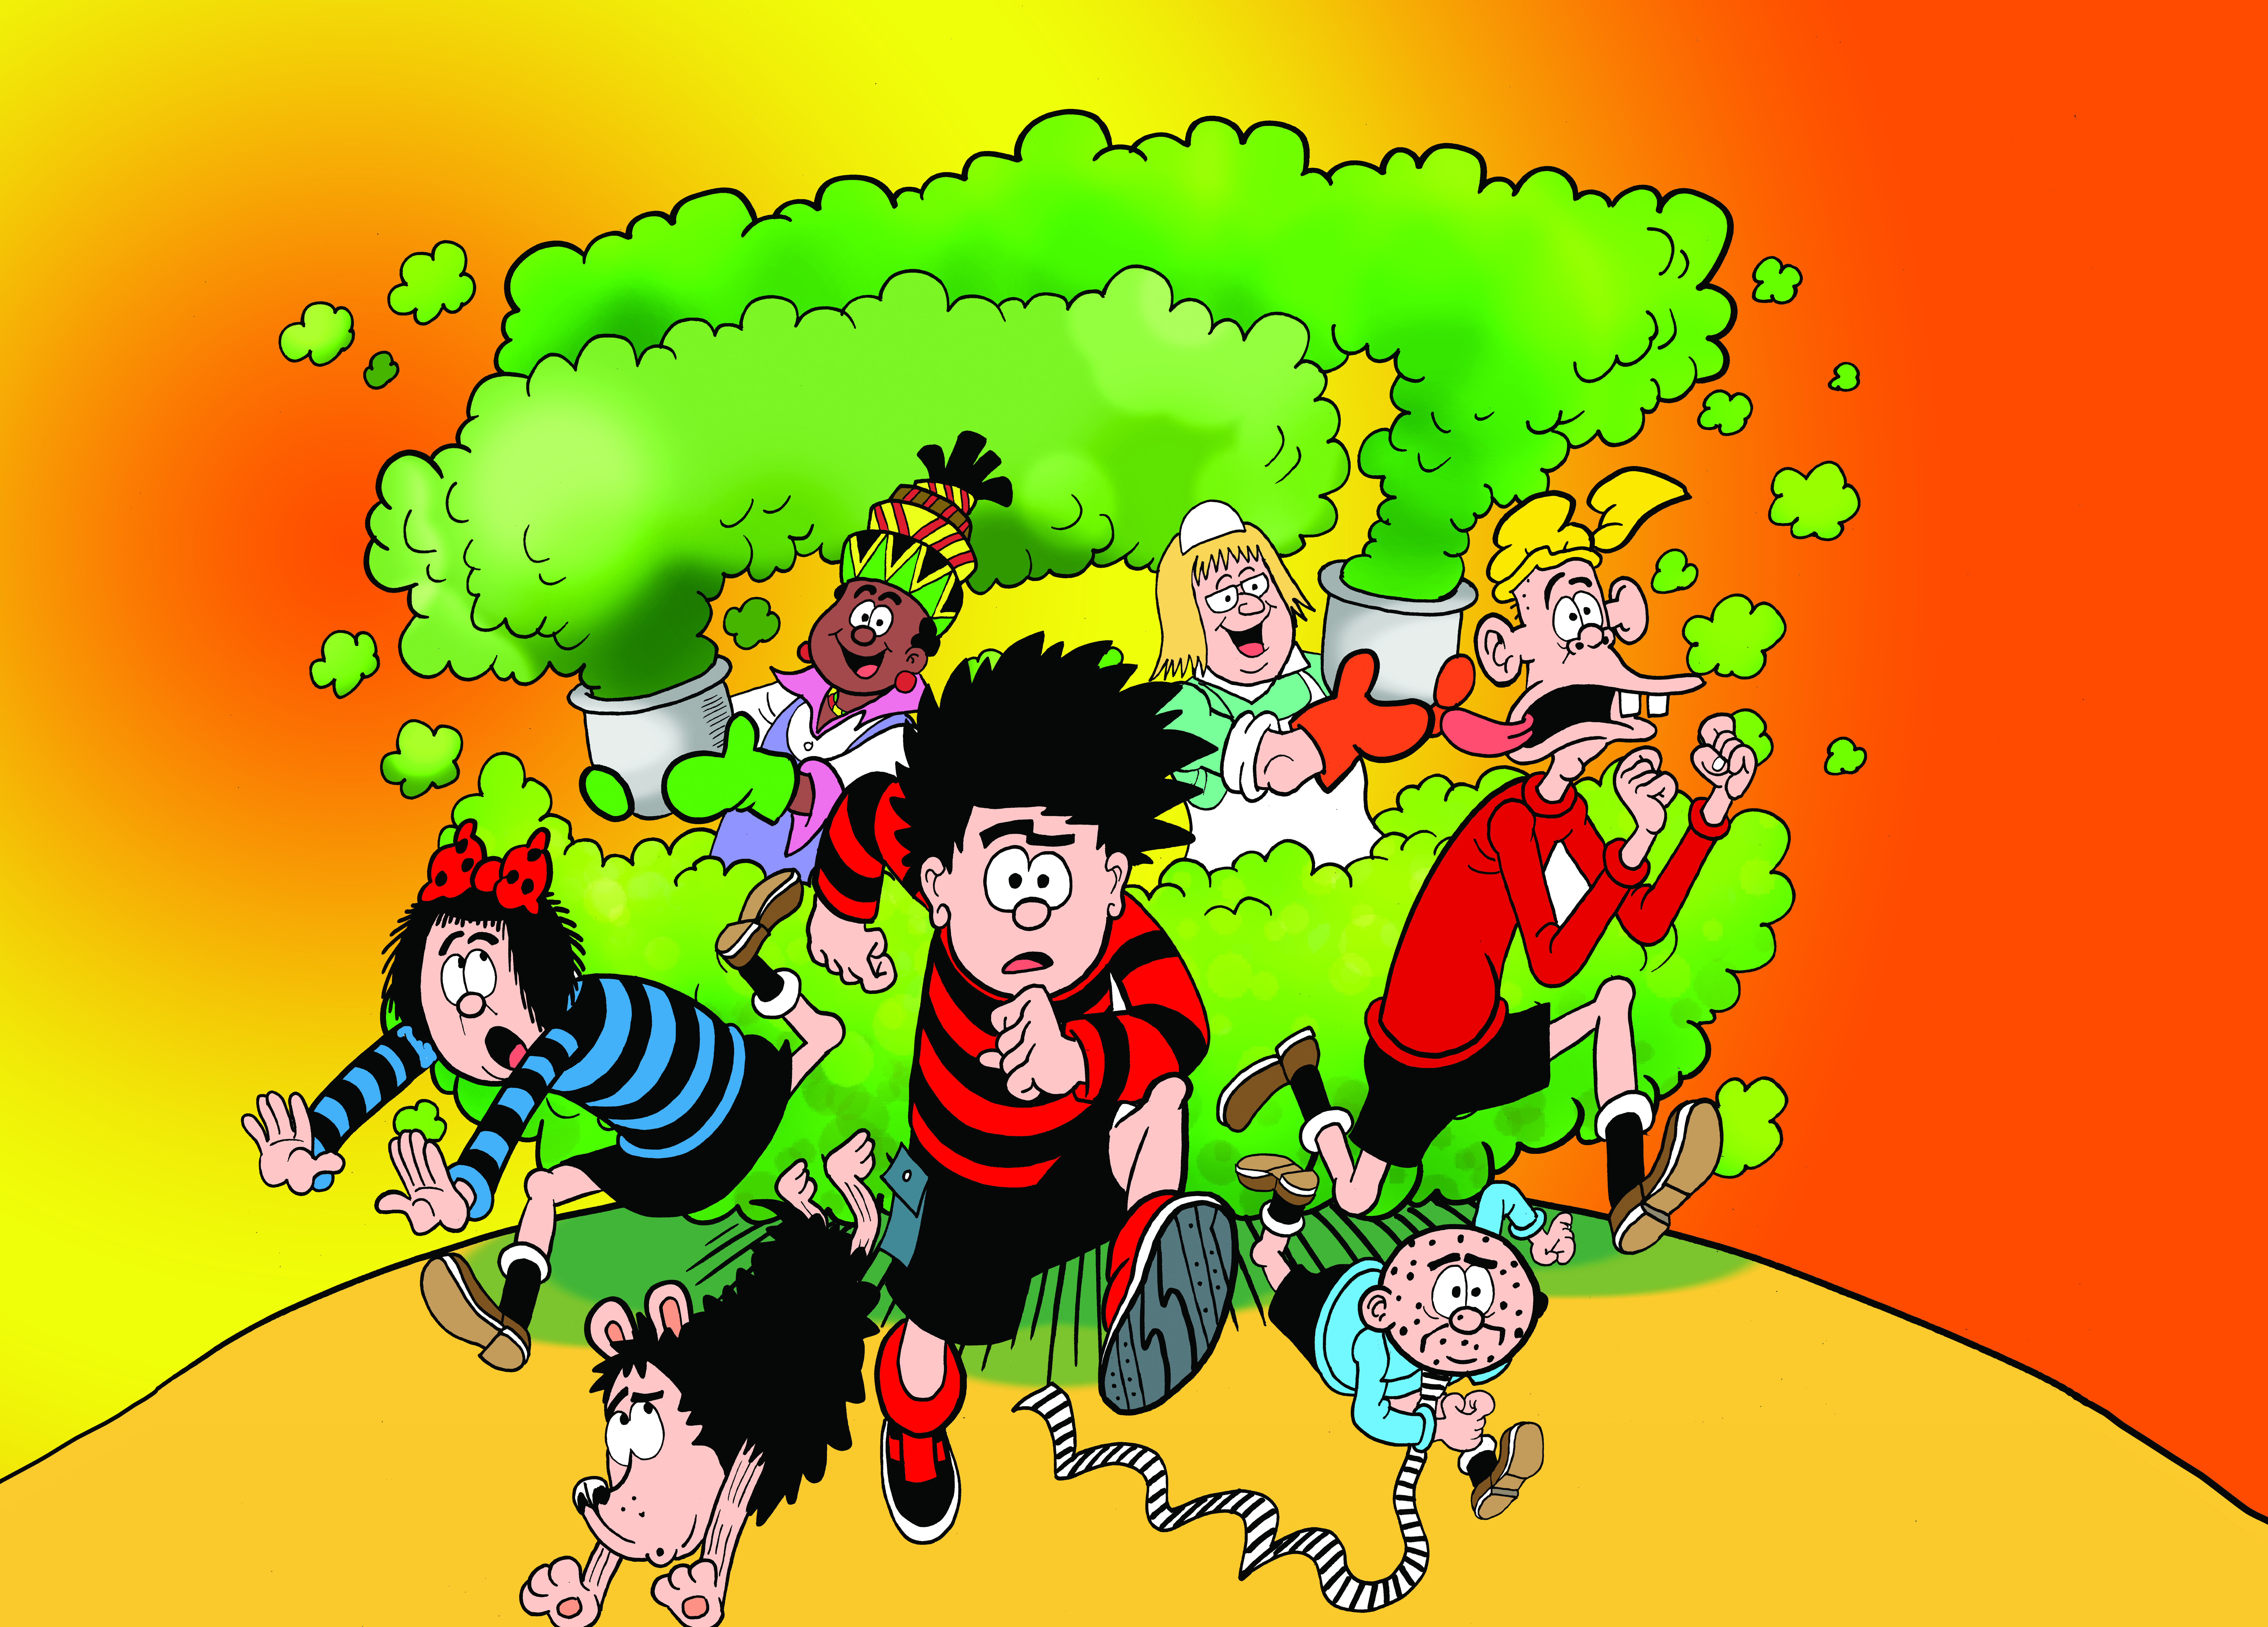 Beano Issue No 3912 - I'm a Bash Street Kid, Get Me Out of Here!